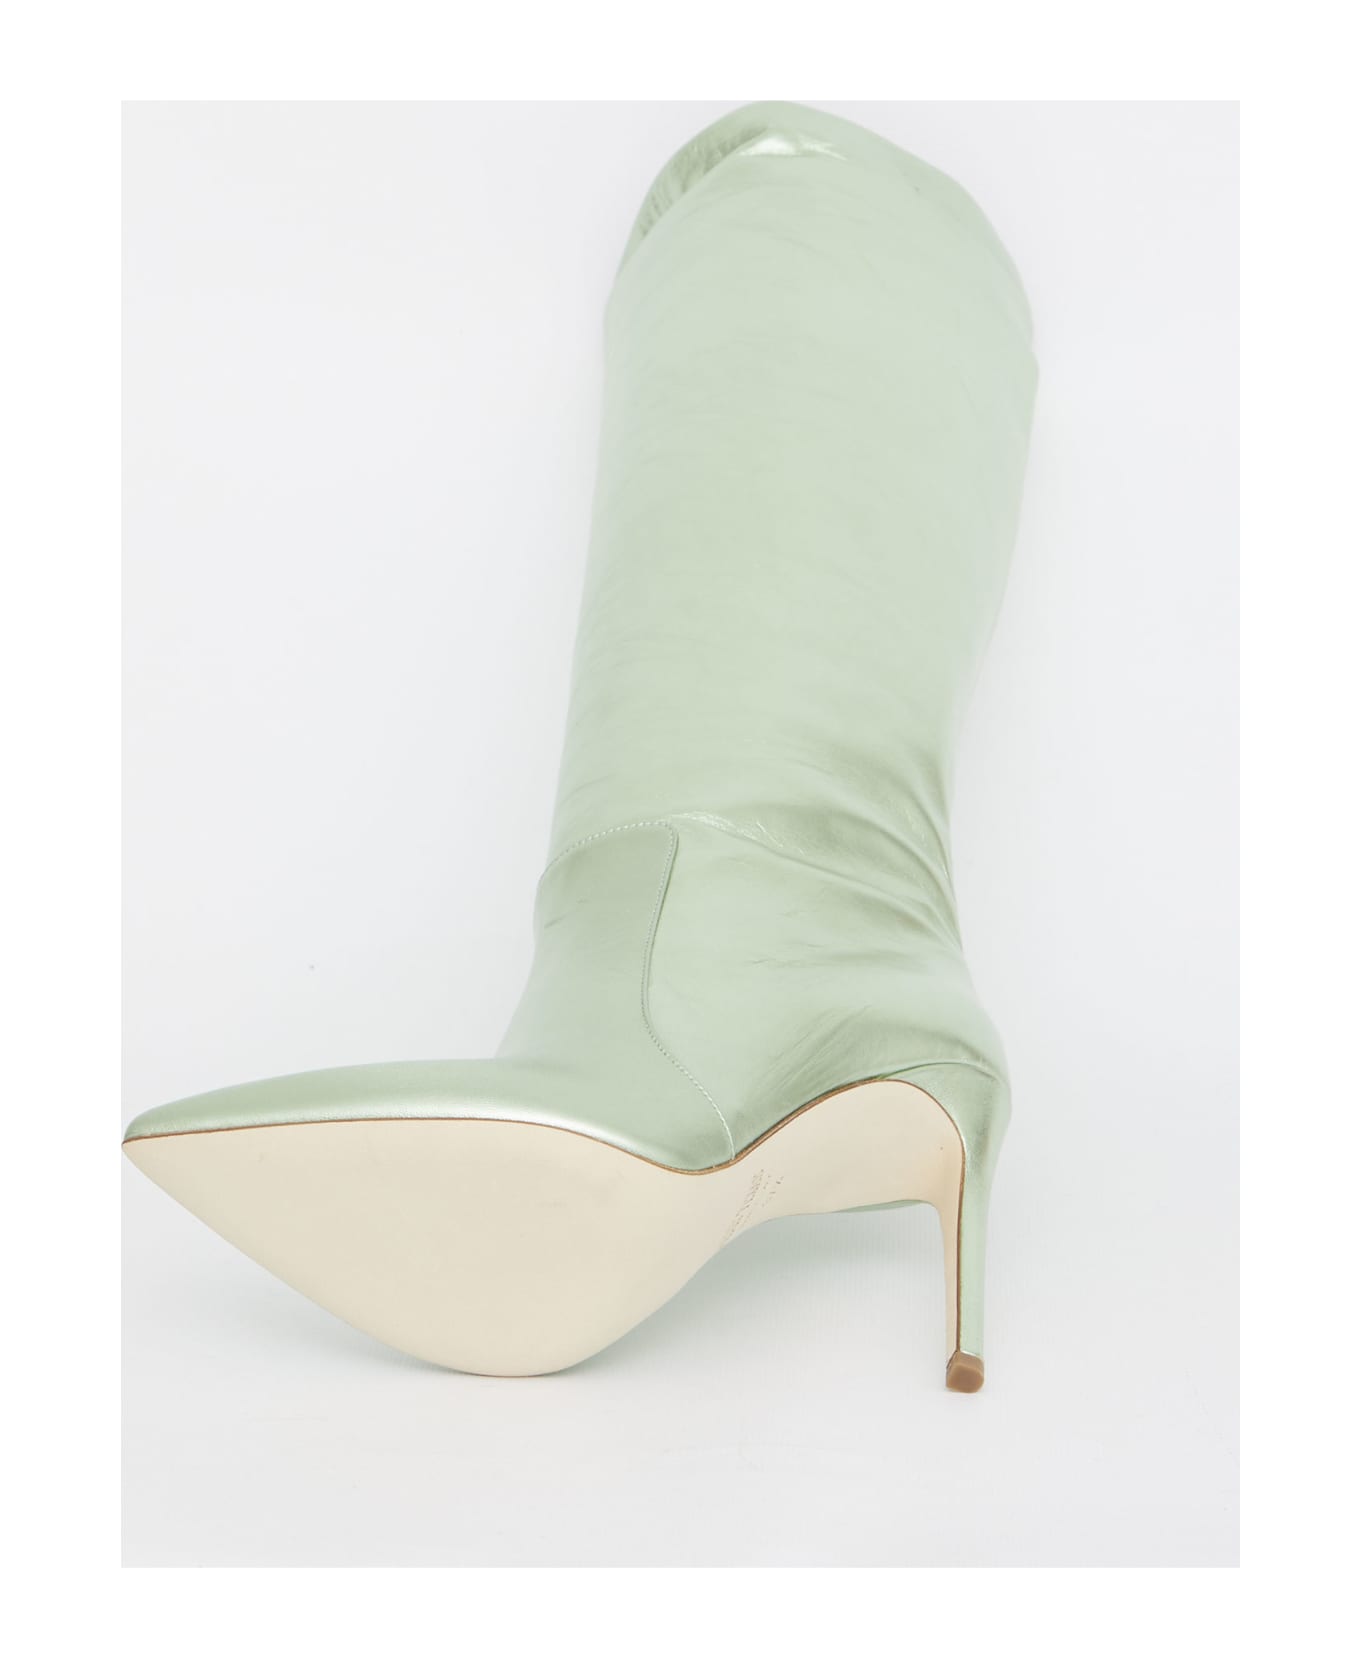 Paris Texas Green Leather Boots - GREEN